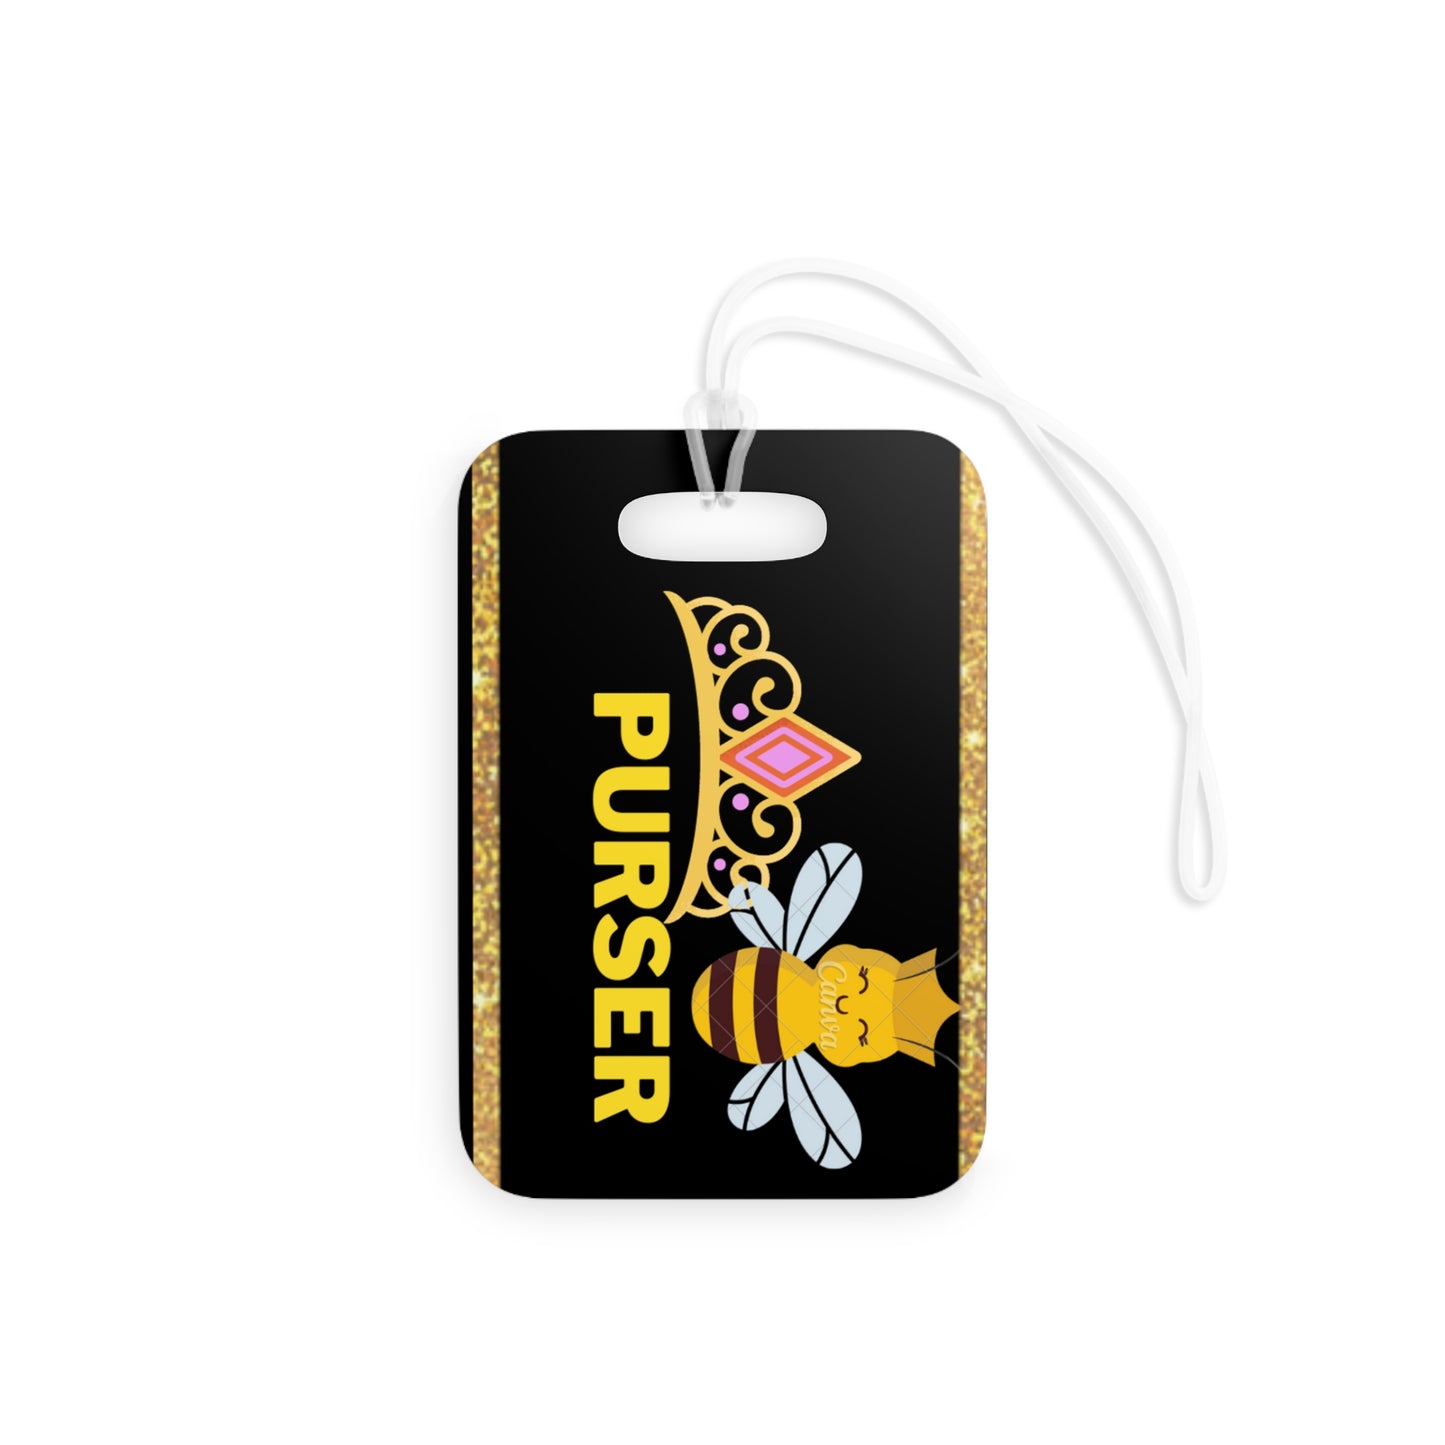 Purser Queen B luggage tags